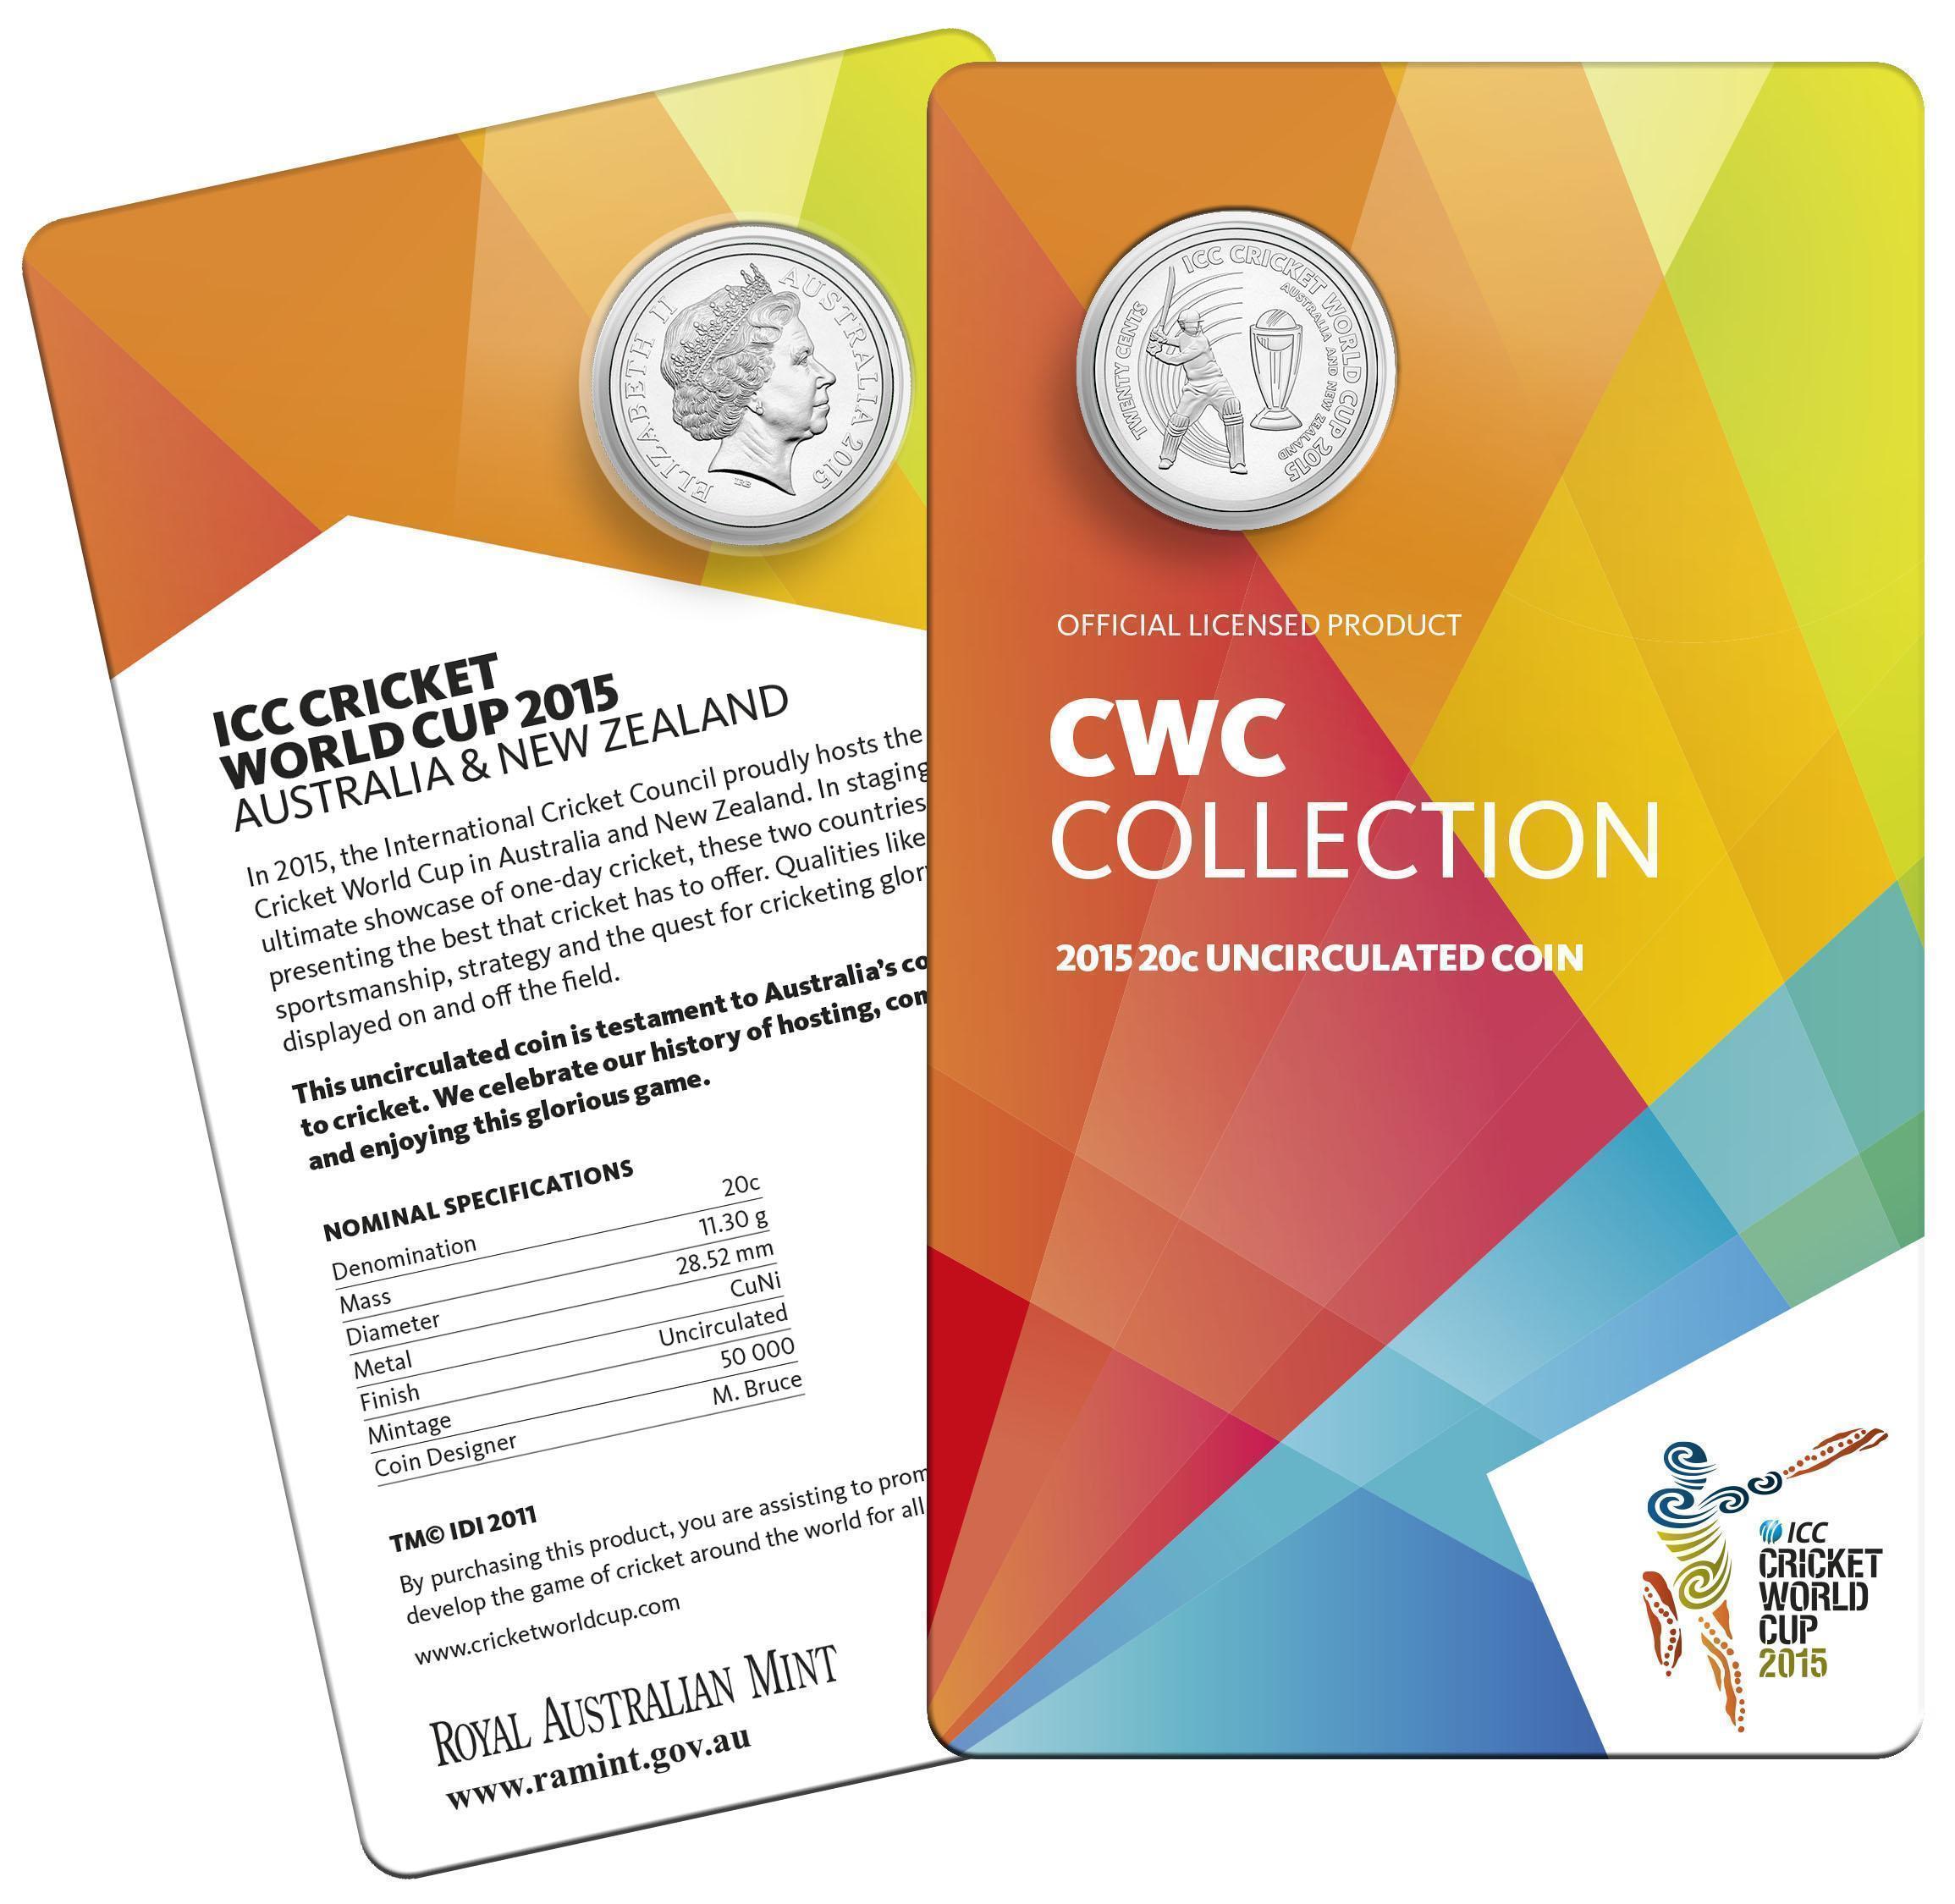 ICC Cricket World Cup 2015 Australia and New Zealand 20c Uncirculated Coin Royal Australian Mint 